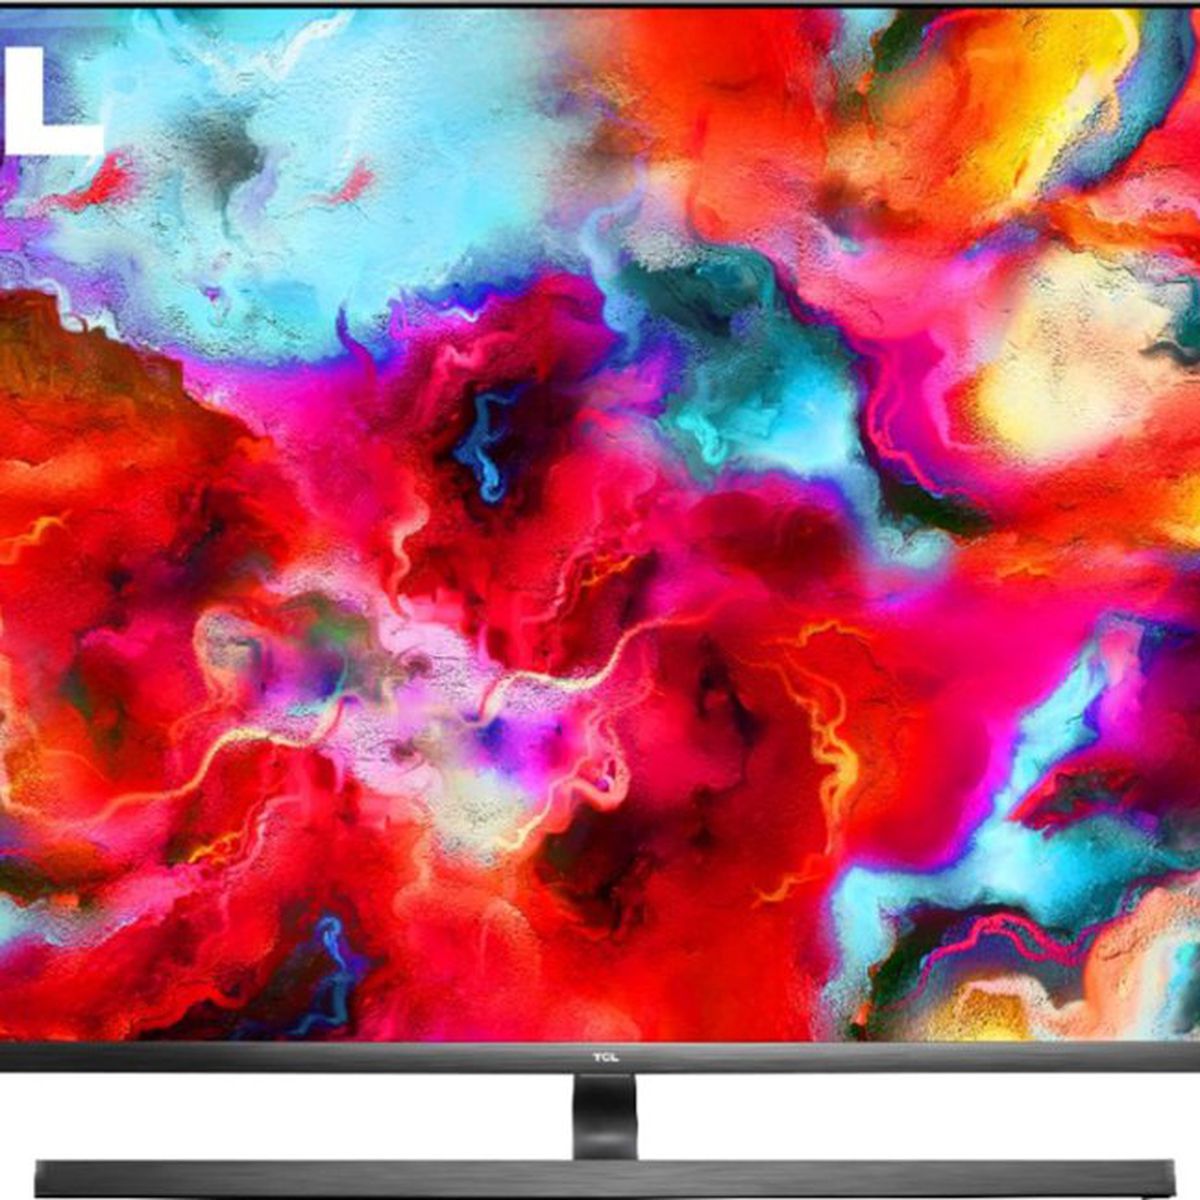 A product shot of the TCL 8-series TV